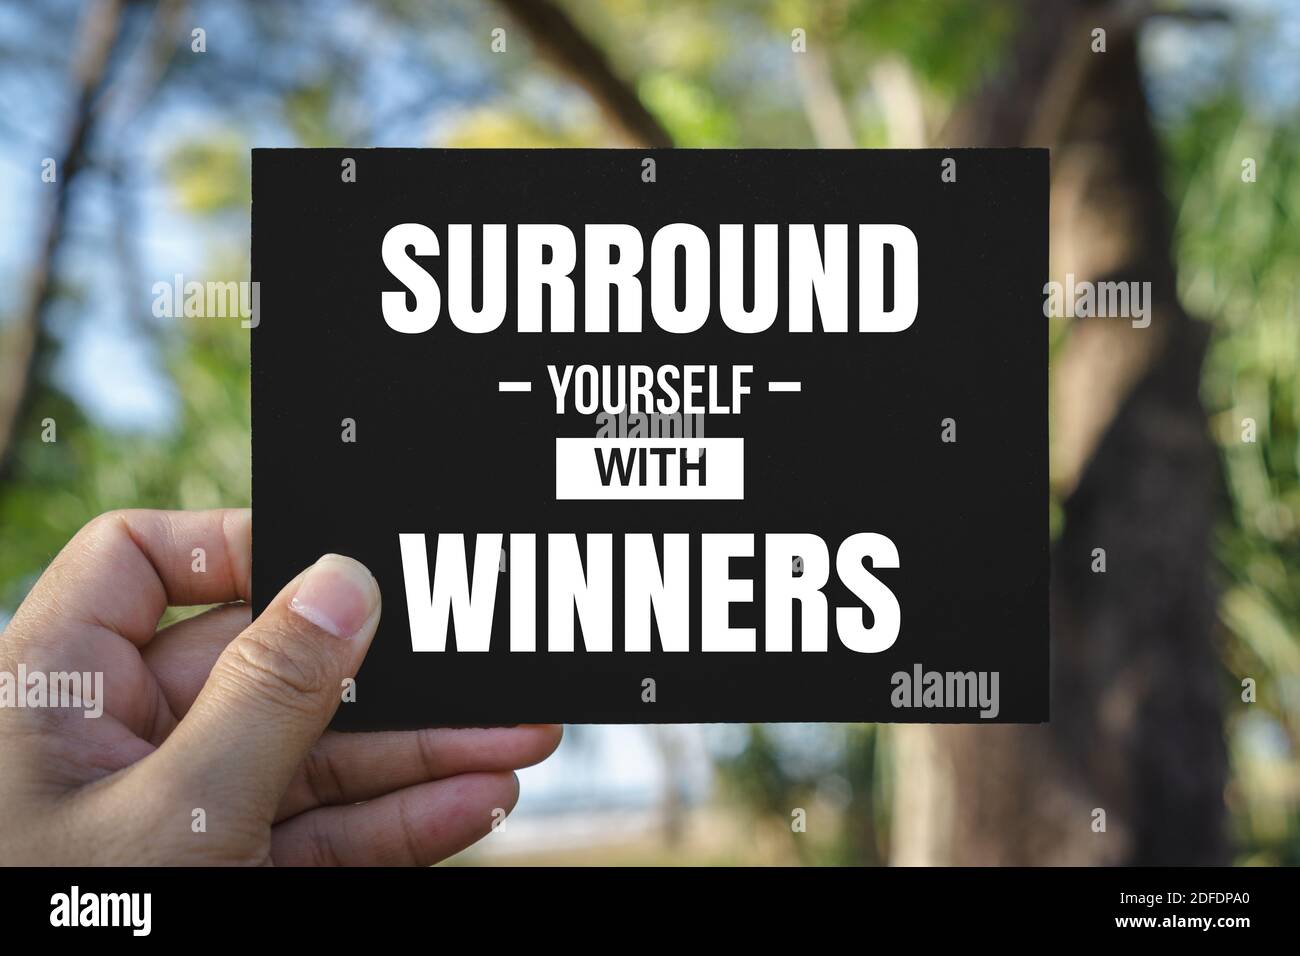 Inspirational and Motivational Quote. Hand Holding Black Paper. Surround Yourself With Winners. Stock Photo